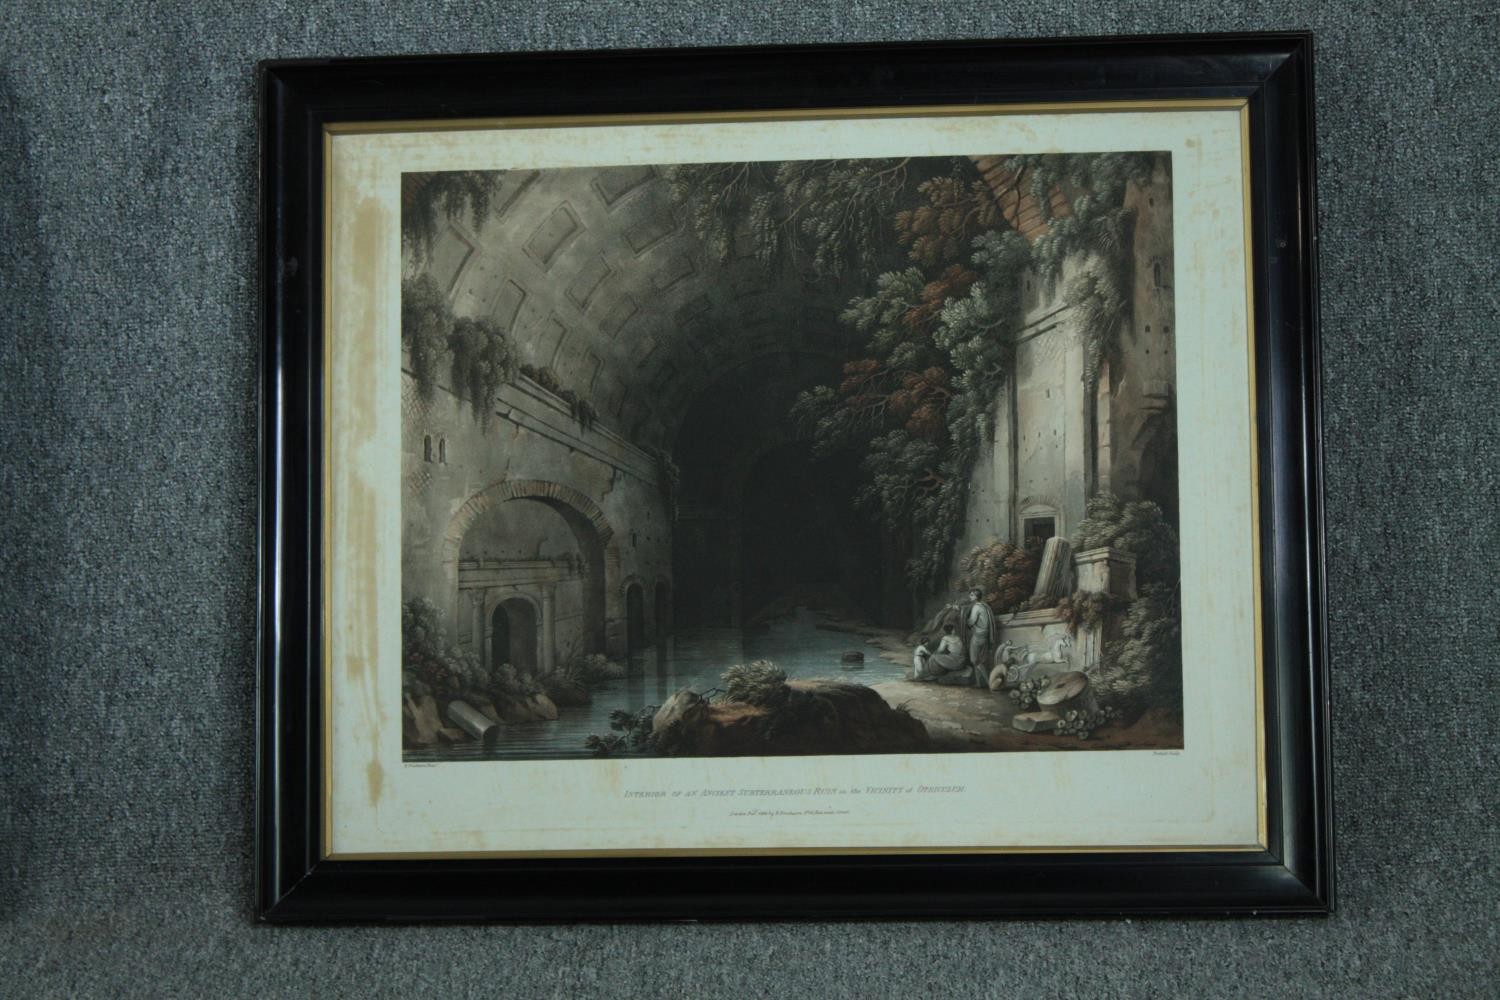 William Pickett. Entrance into an Ancient Subterraneous Ruin in Vicinity of Otriculum. Published - Image 7 of 8